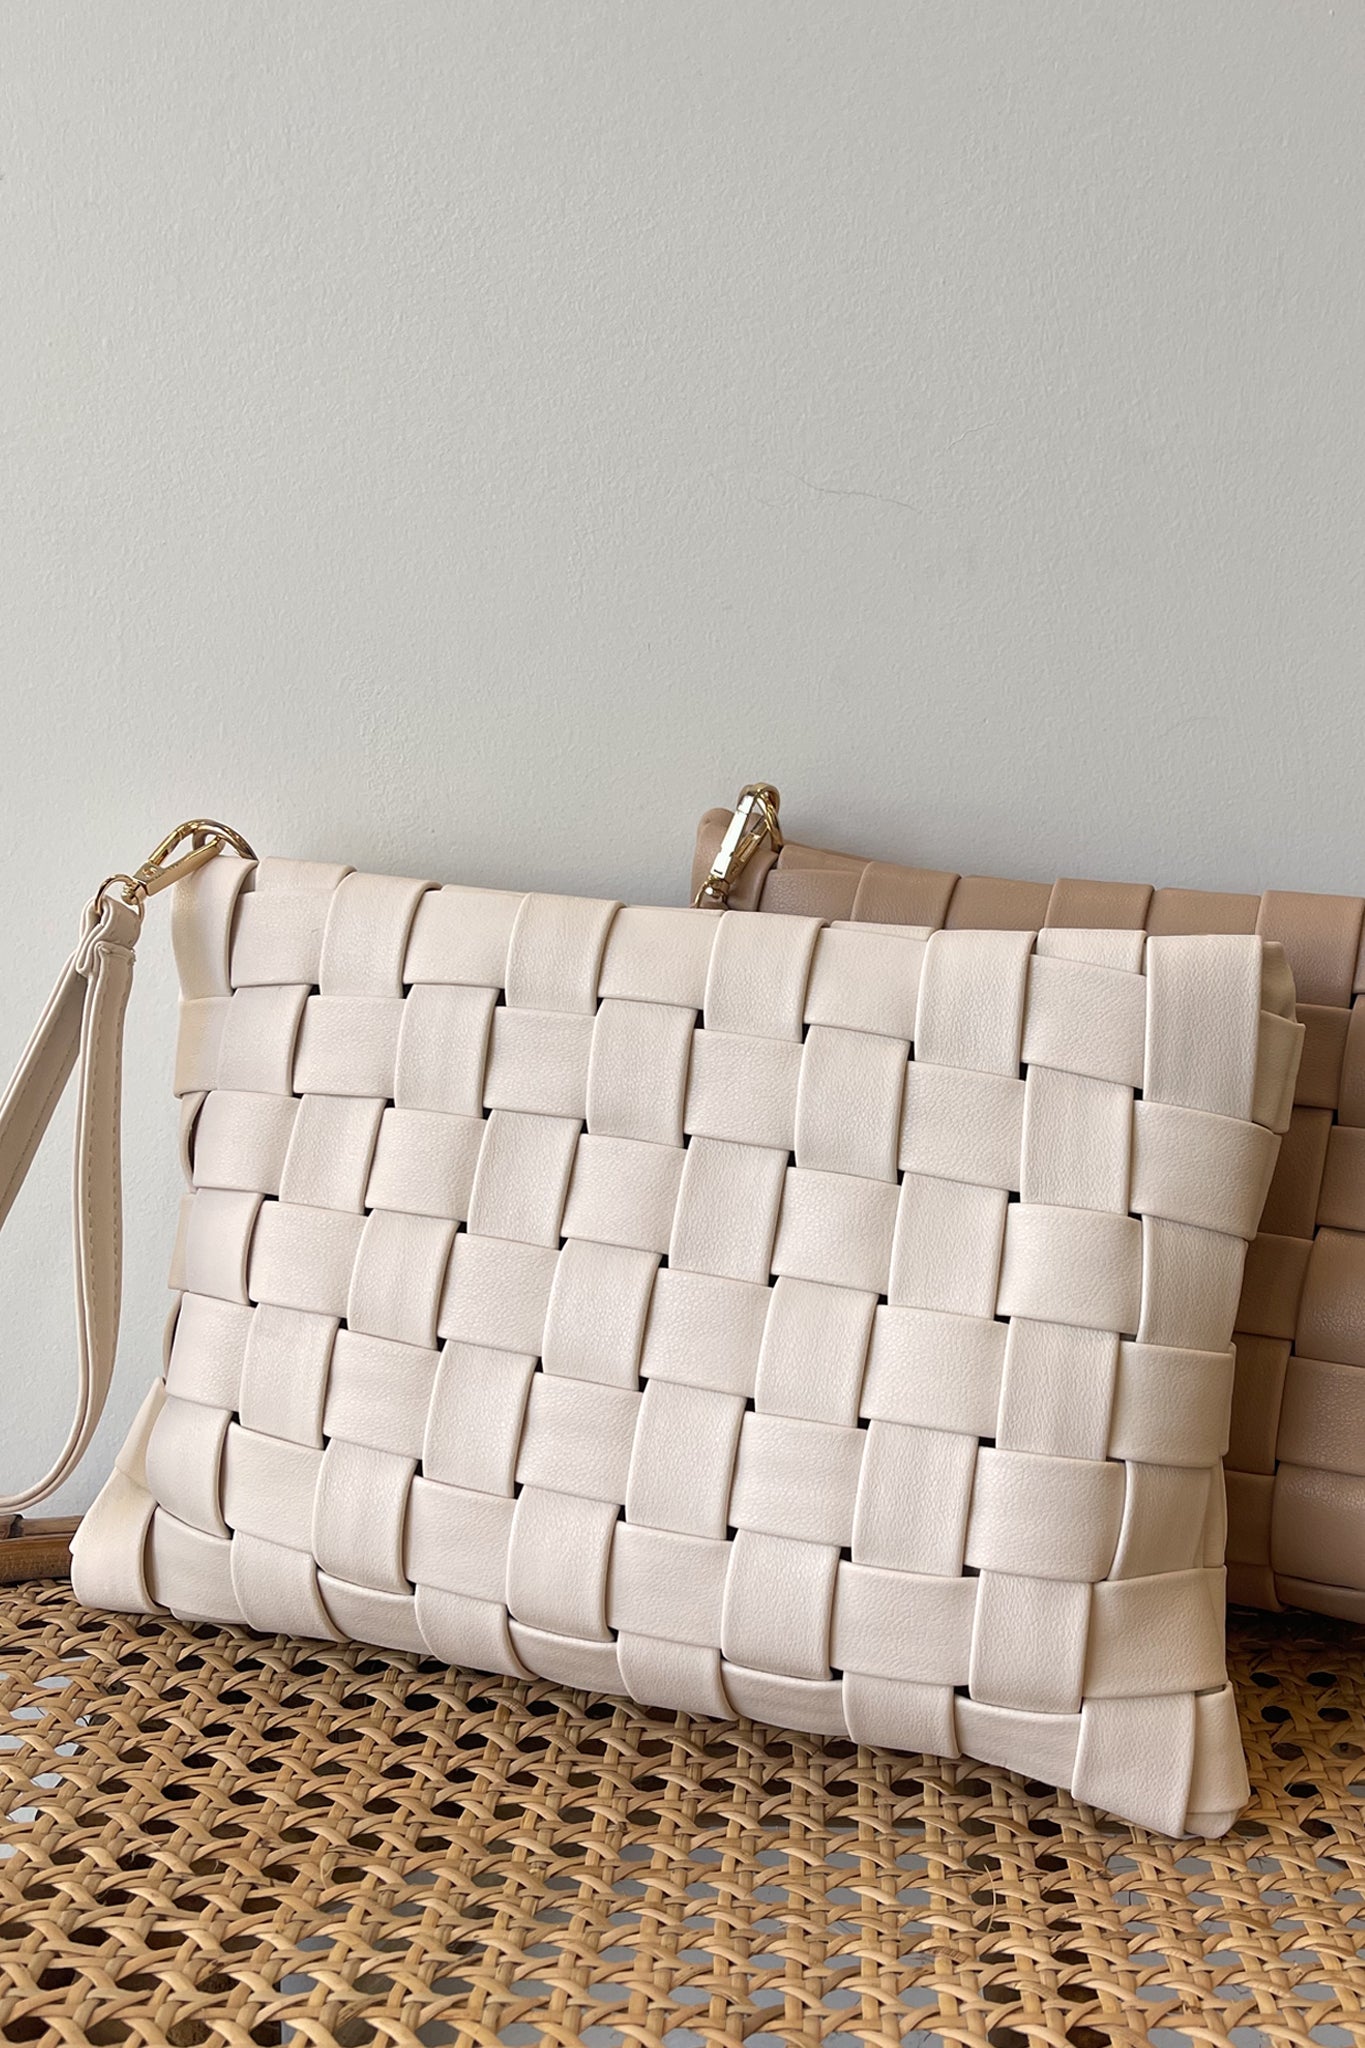 View 2 of Keen Woven Clutch in Ivory, a Bags from Larrea Cove. Detail: .